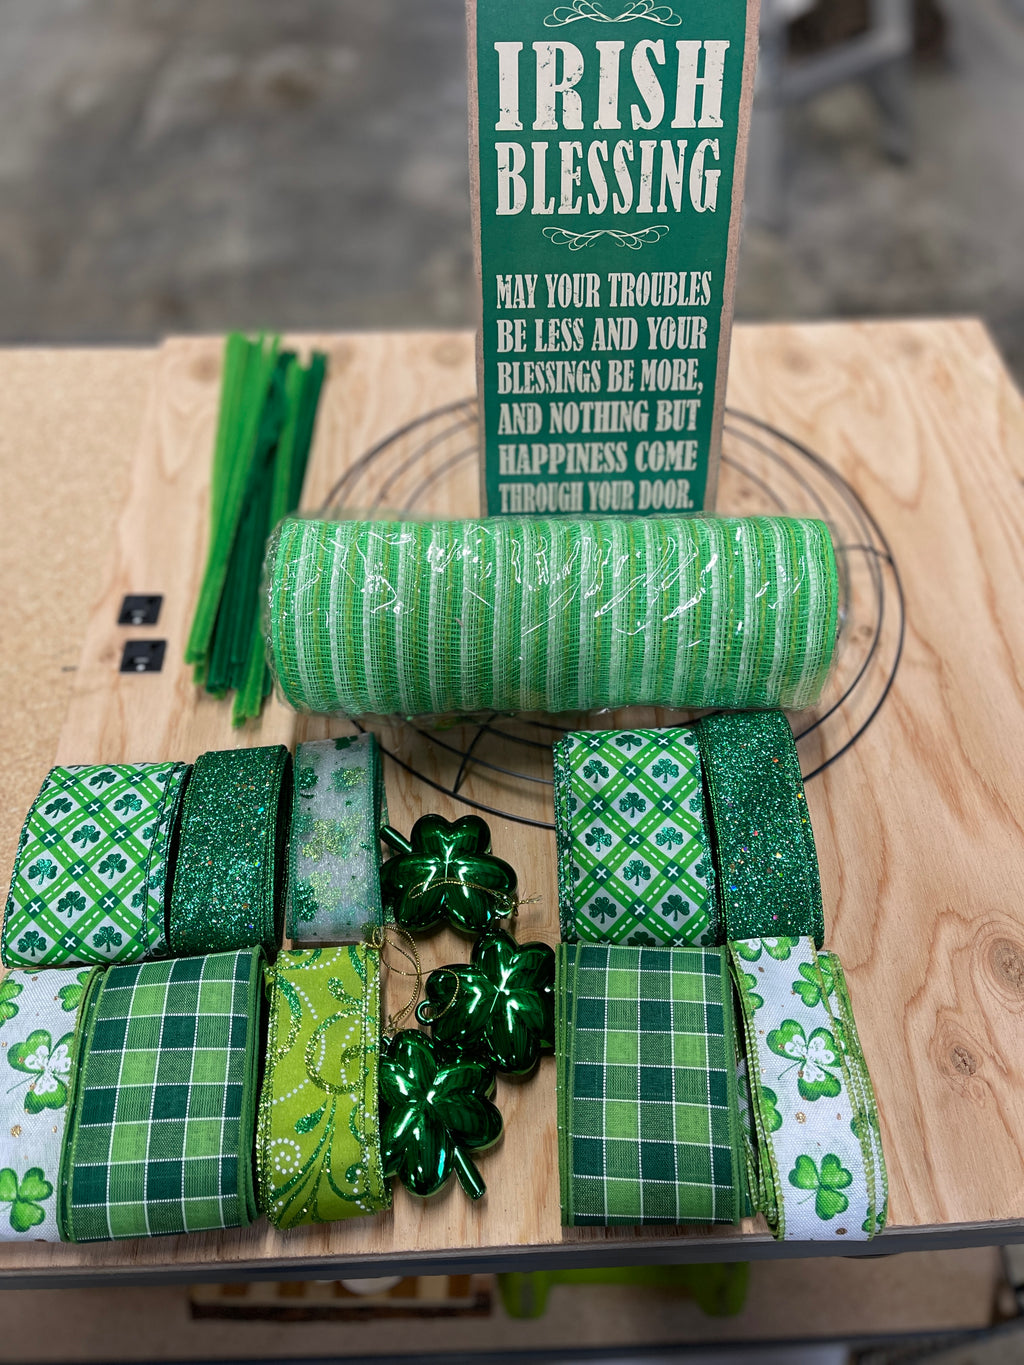 Irish Blessing Wreath Making Kit containing a roll of jute mesh in green and white stripes, lime green, white and green ribbons in clover patterns, solids and plaids